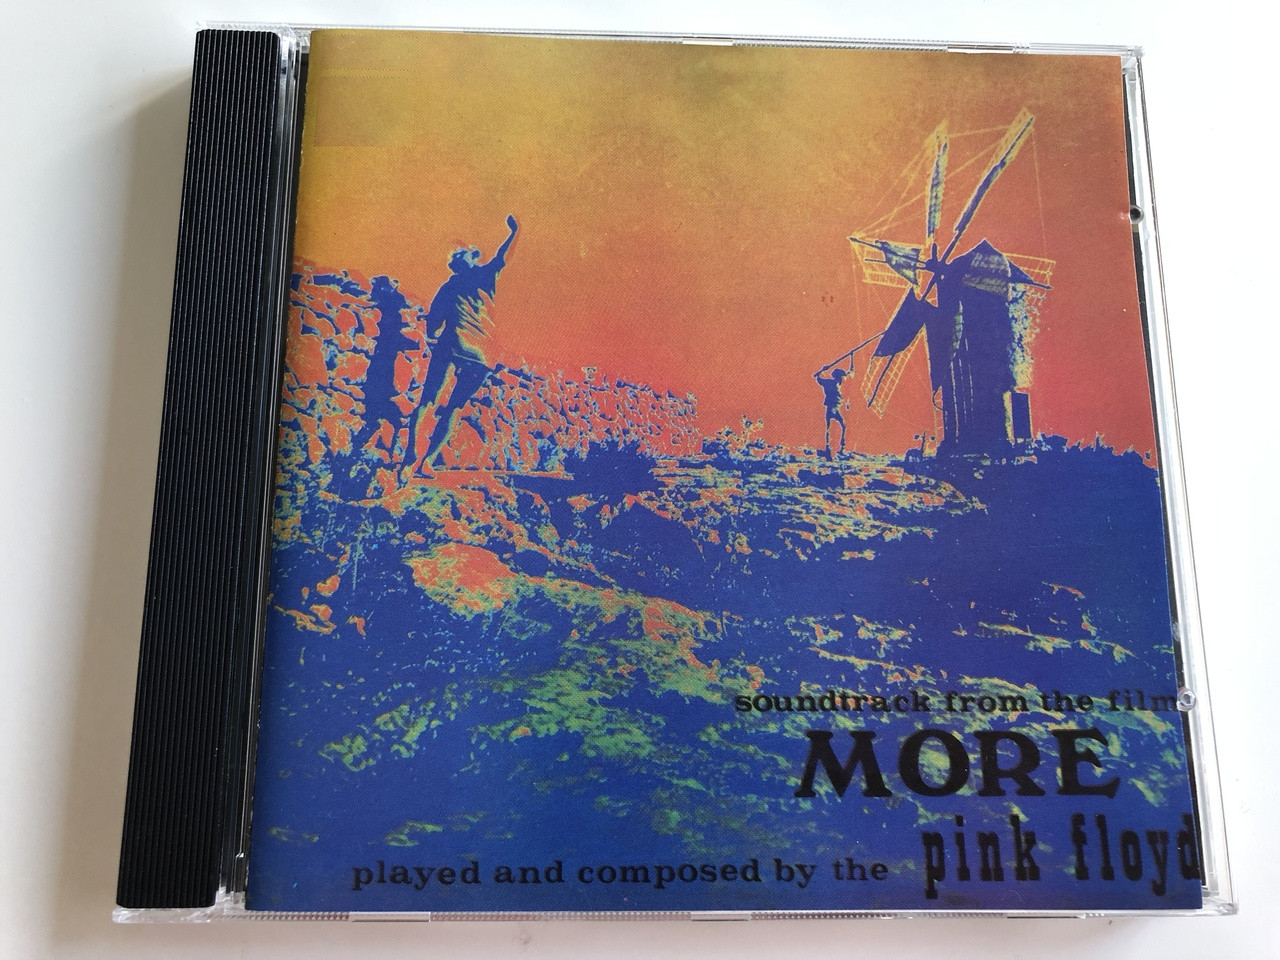 Soundtrack from the film MORE / Played and composed by the Pink Floyd /  AUDIO CD 1969 - bibleinmylanguage